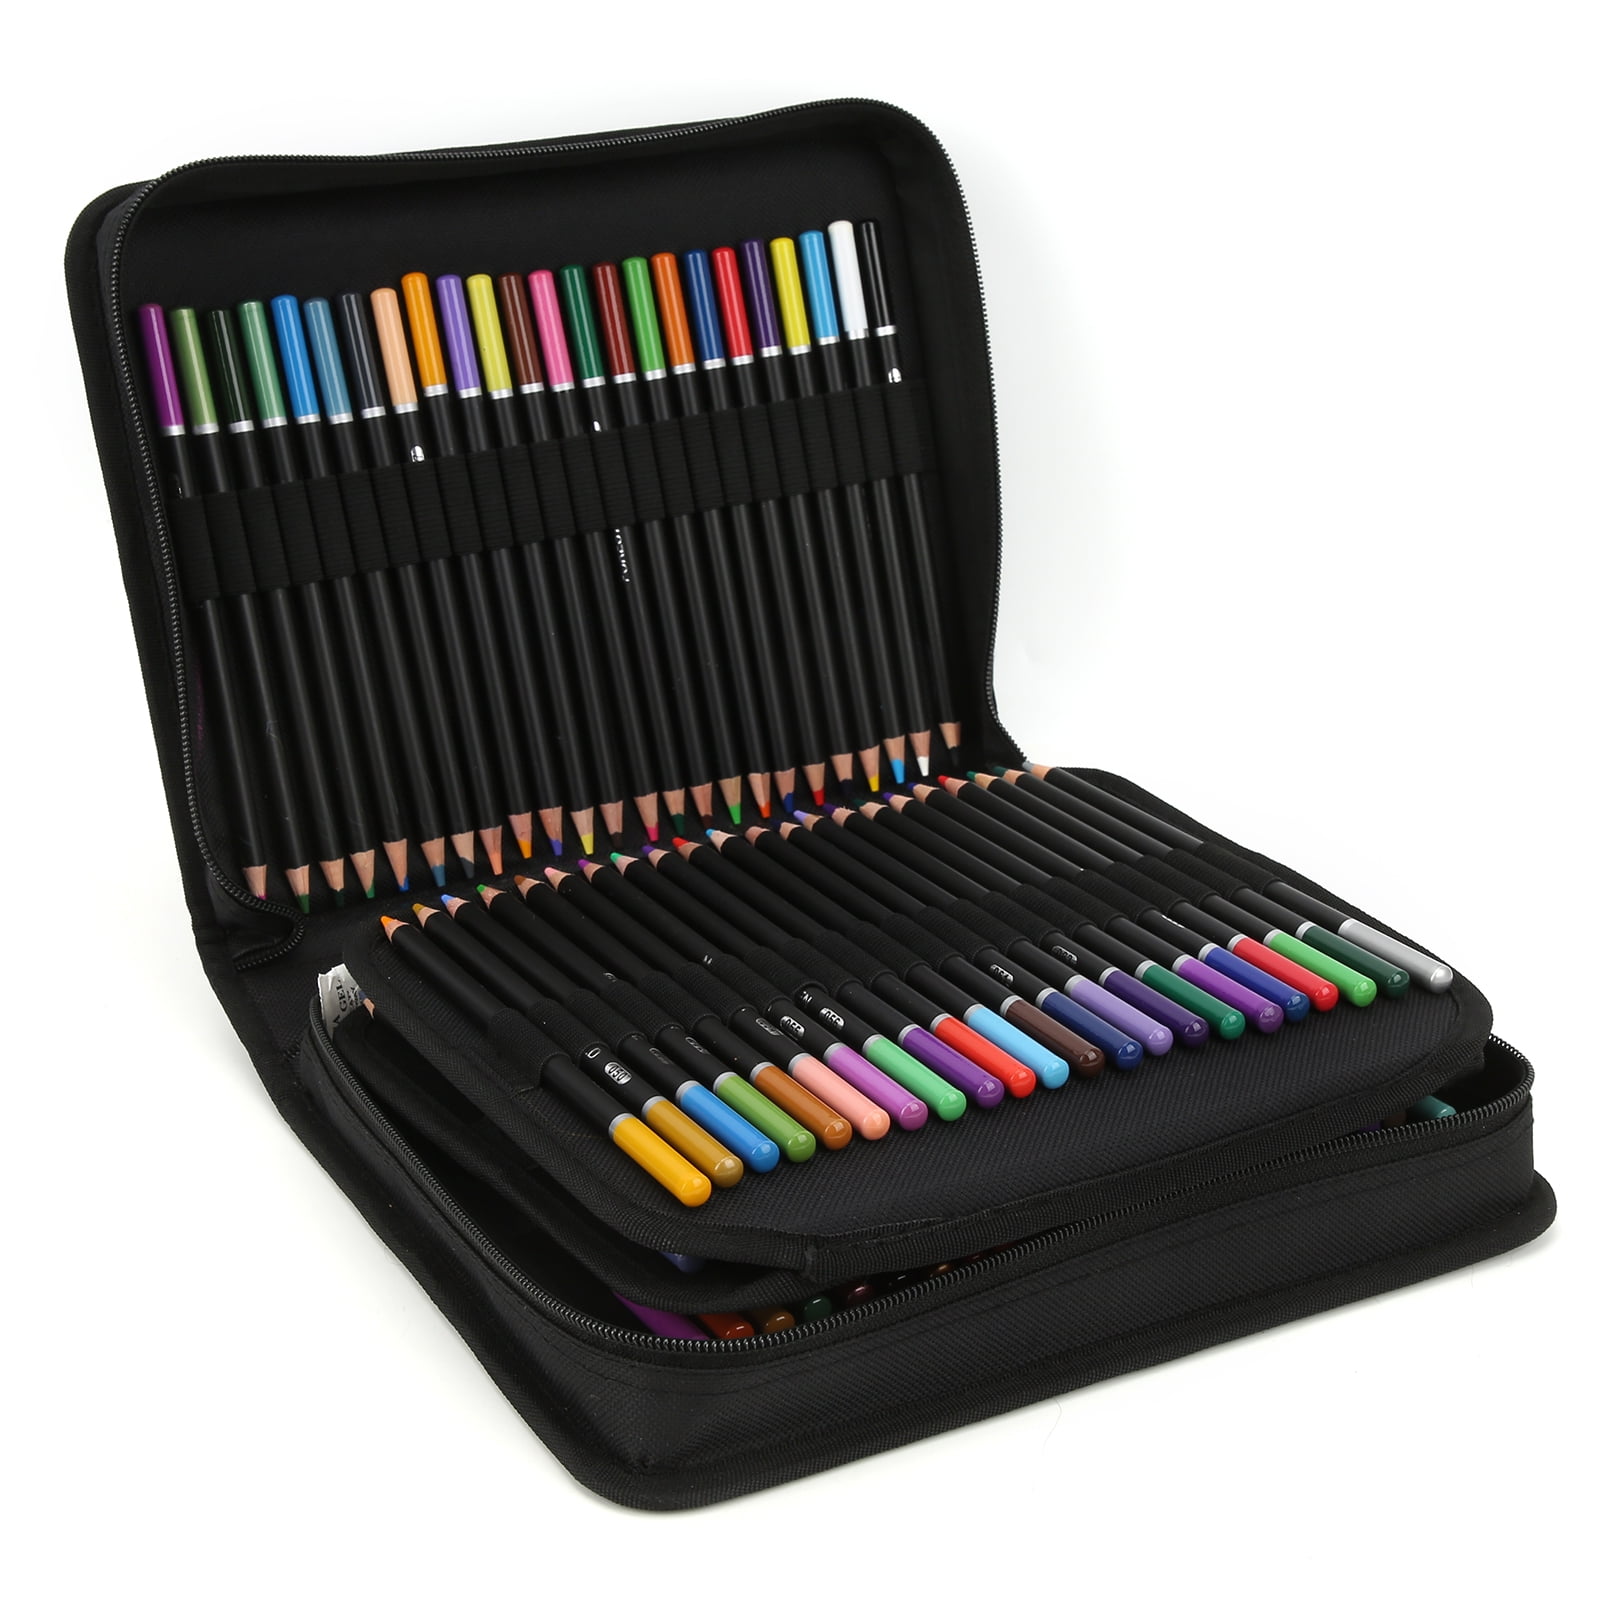 72 Colored Pencils Set,Artist Color Pencil Kit for Adult Kids Teens  Coloring DrawingSoft Core,Oil Based Coloured Pencil,Coloring Book,Sketchpad,Sharpener  in Pencil Case 